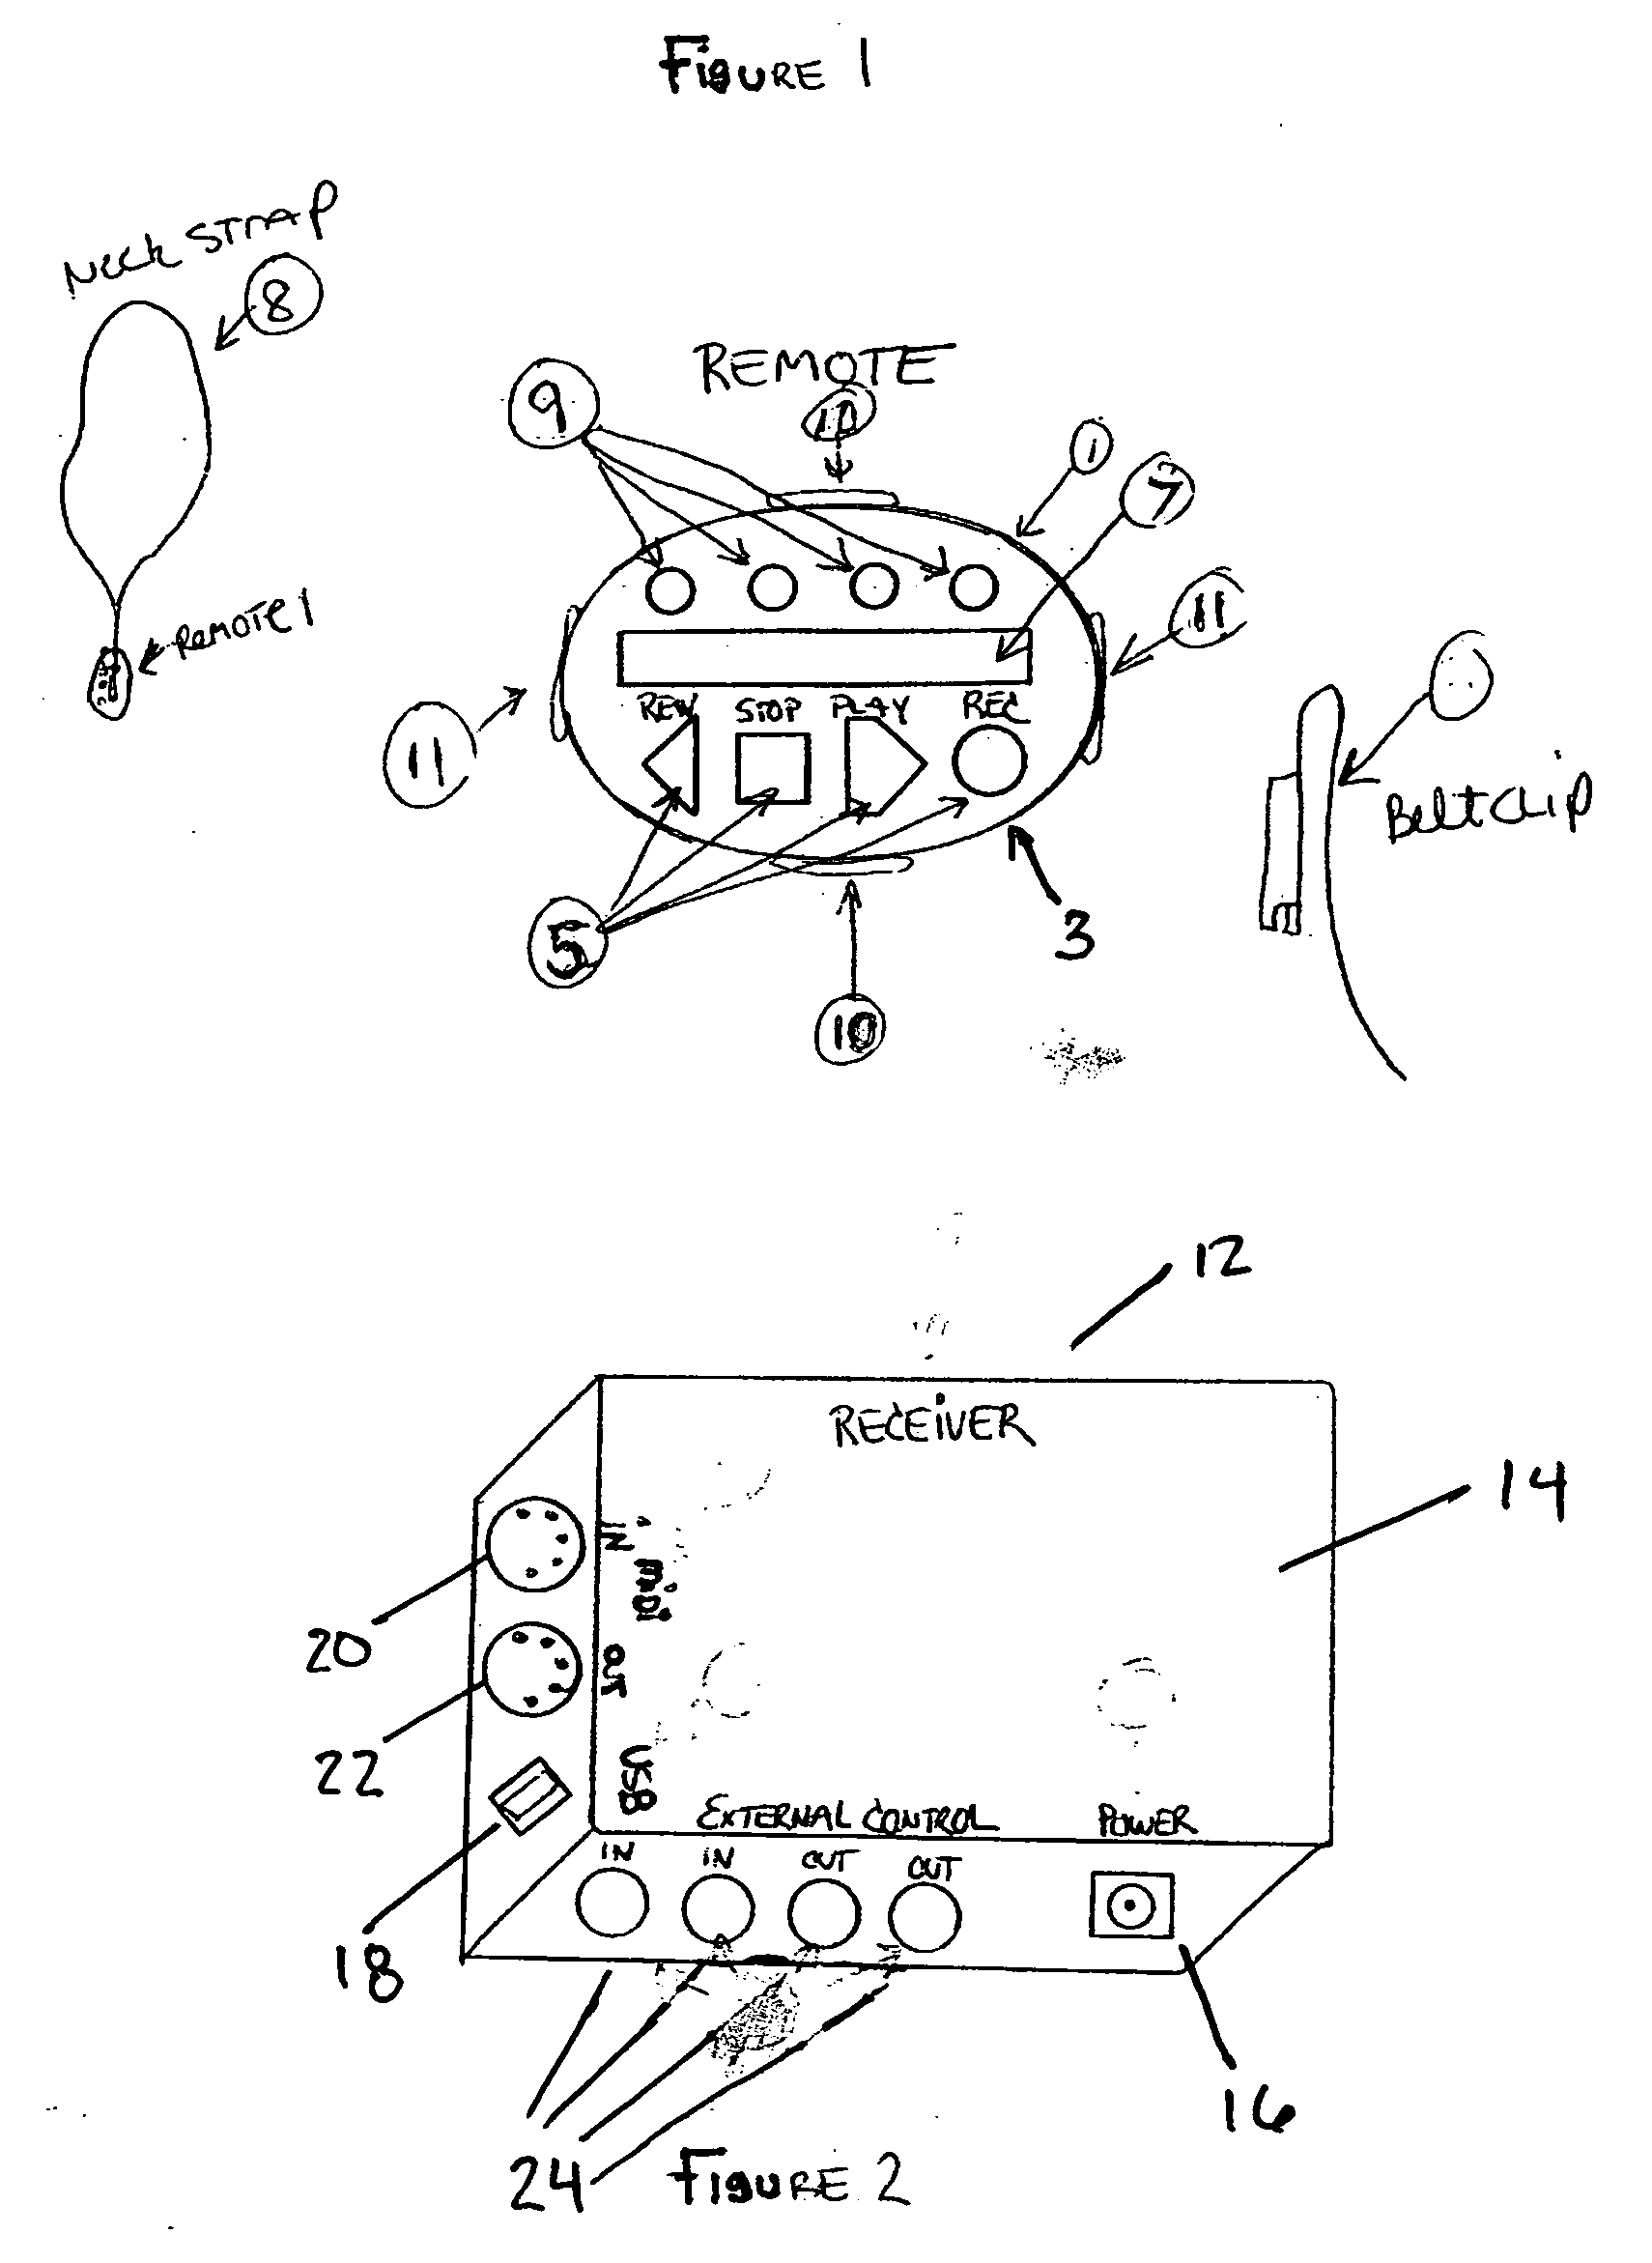 System and method for controlling a recording studio